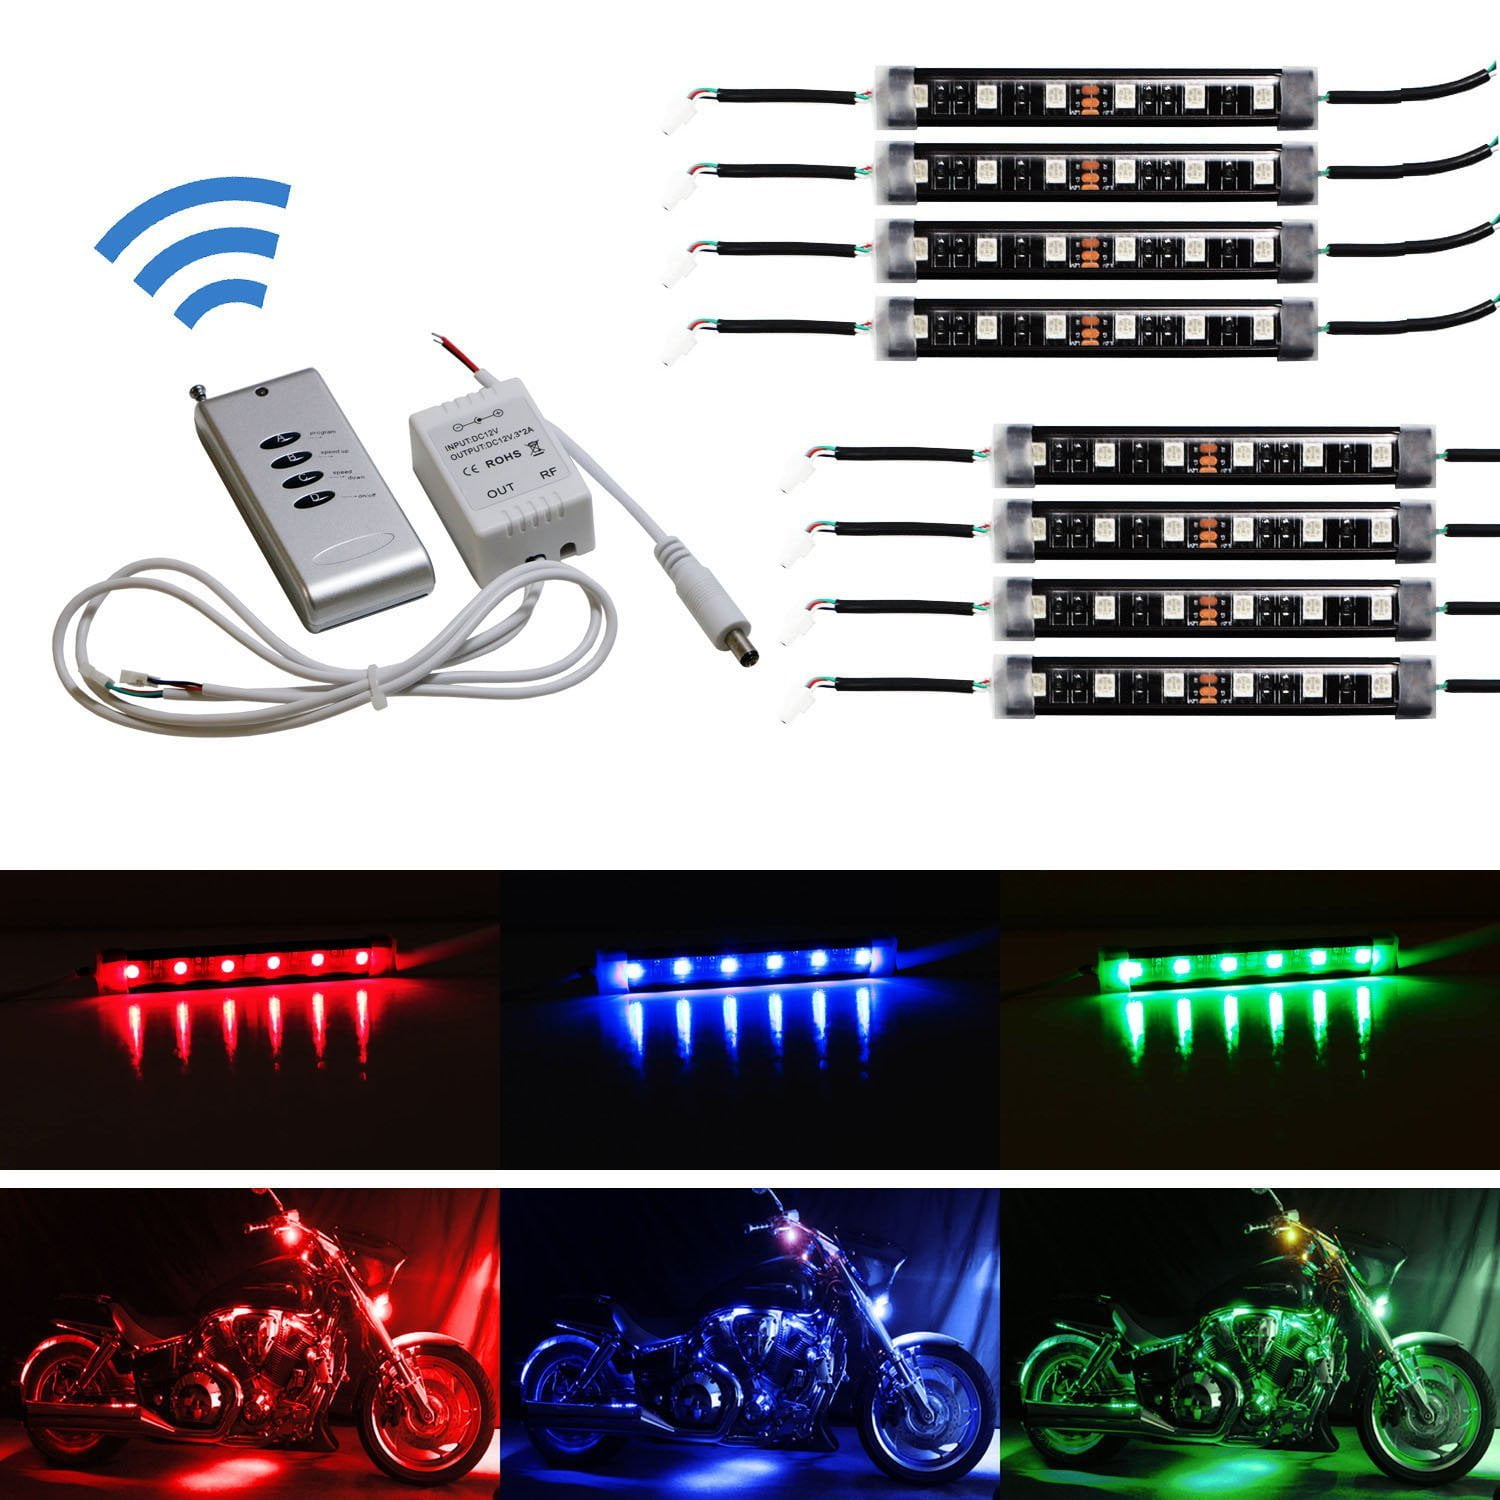 iJDMTOY 8pcs RGB Multi-Color LED Motorcycle Ground Effect Light Kit w/Wireless Remote Control 